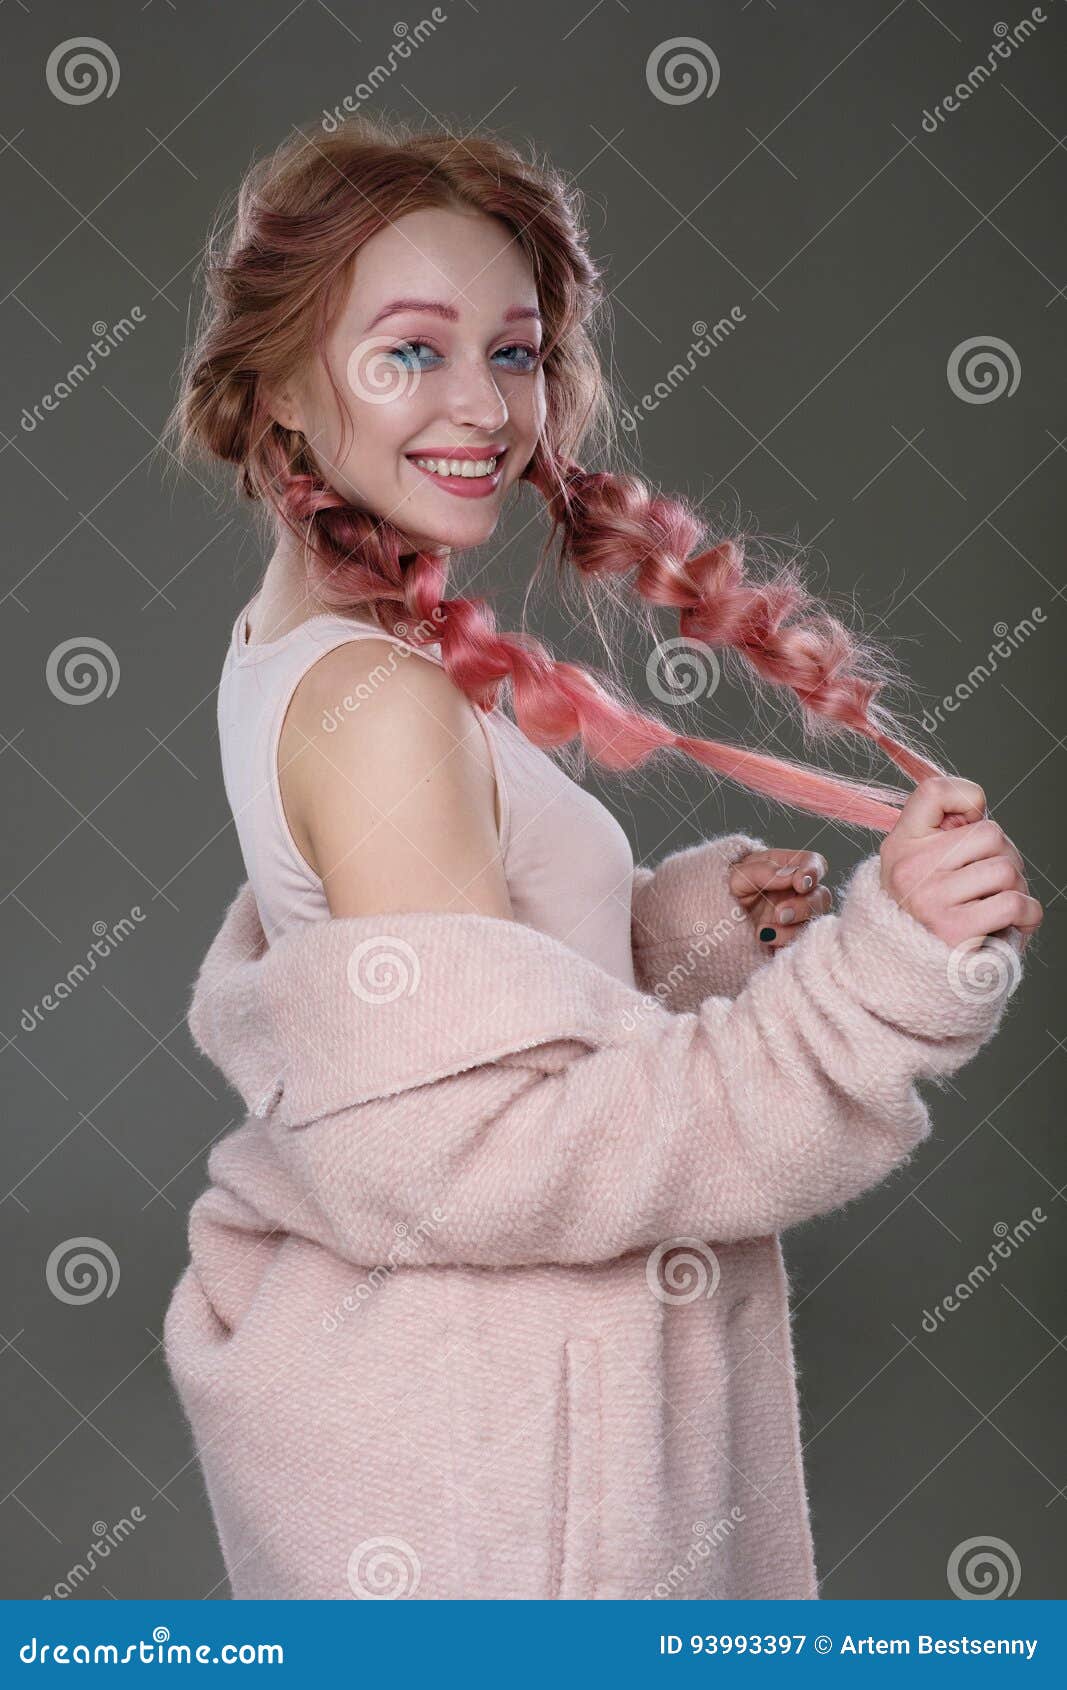 Portrait Of A Girl With Pink Hair In Braids With Blue And Pink